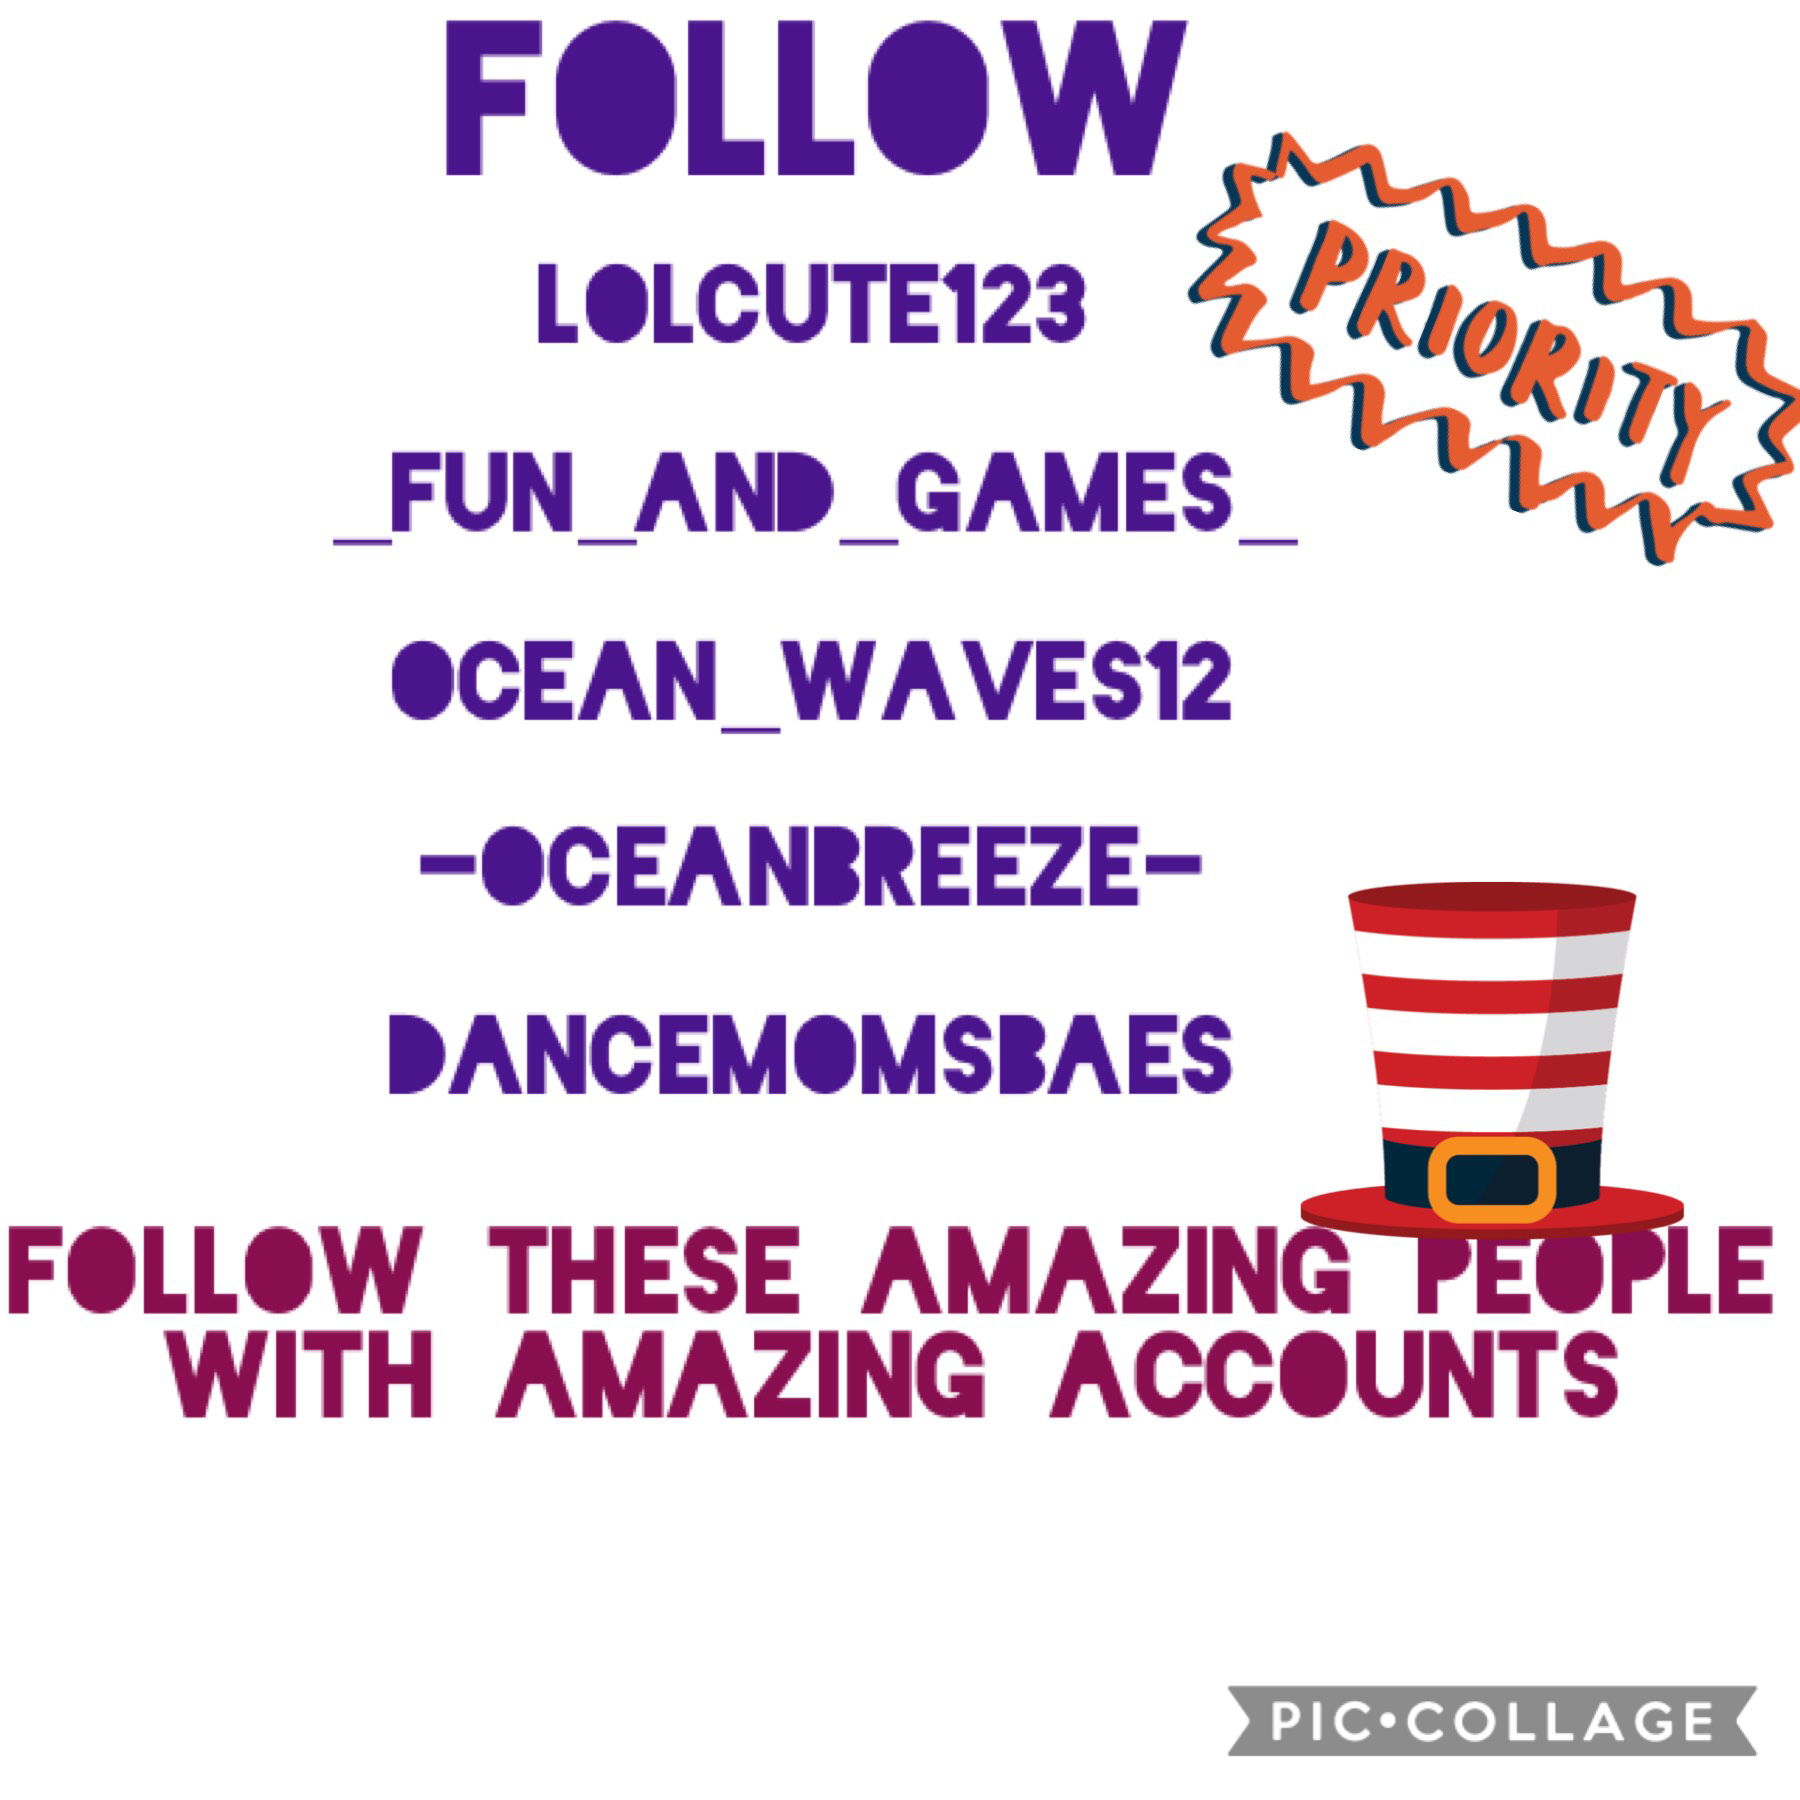 Follow them please the colleges that are on this account are from them! They would really appreciate another follower!